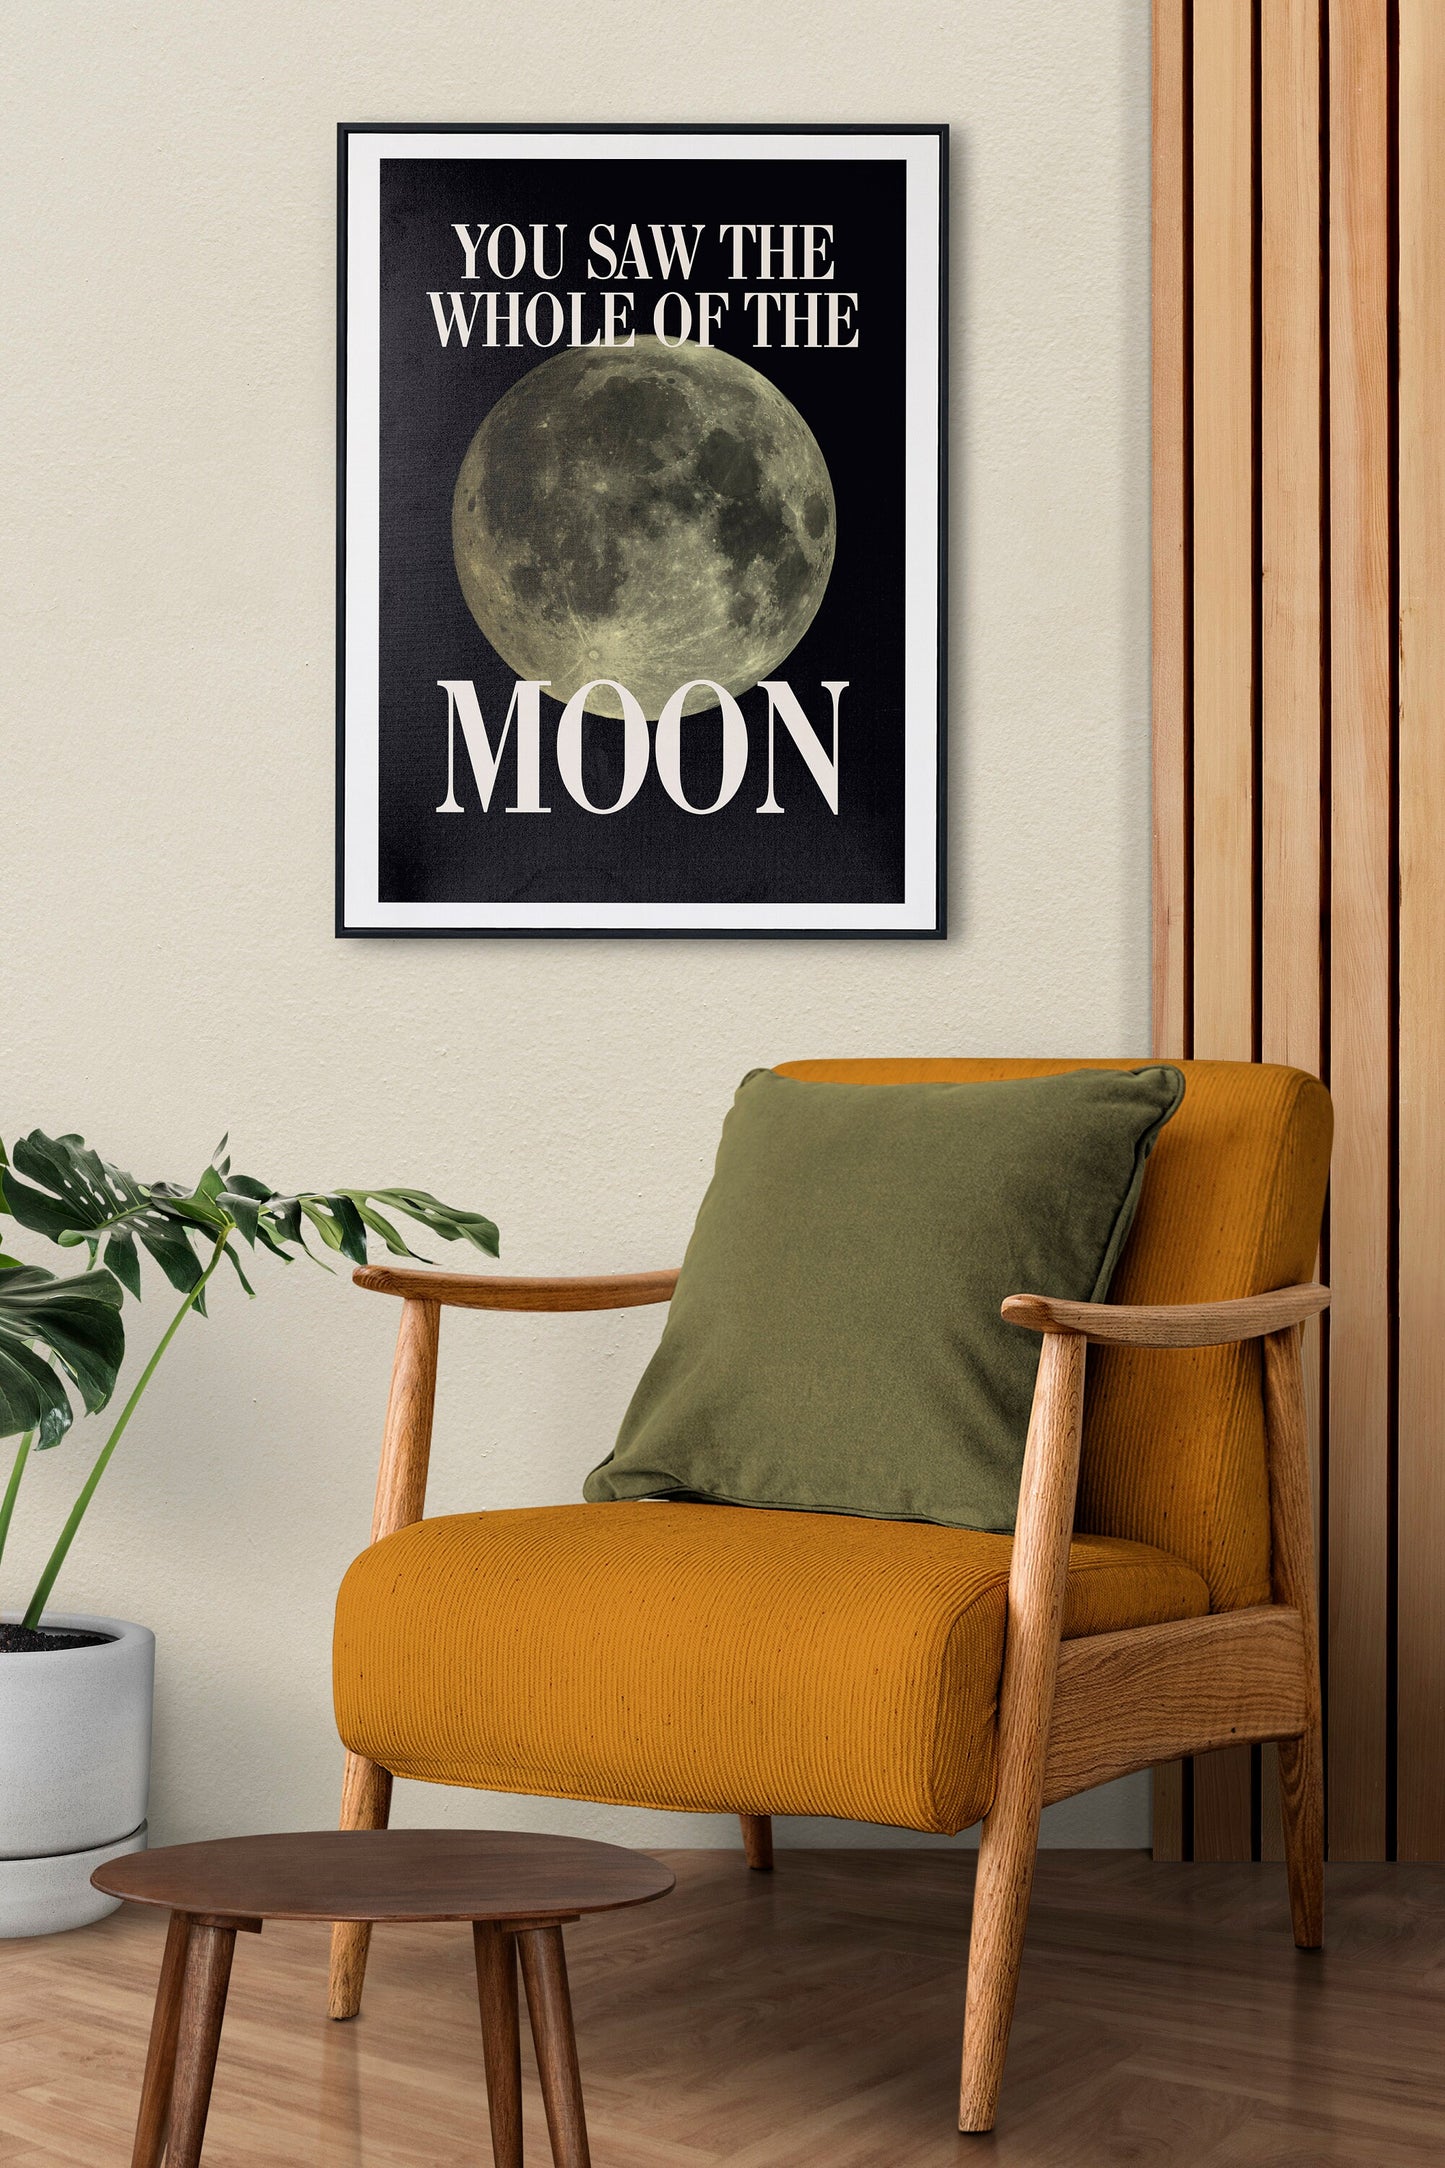 The Waterboys Inspired Print, The Whole Of The Moon Lyrics Print, Retro, Music Wall Art, Indie Music Print, Gig Concert Poster, Music Prints